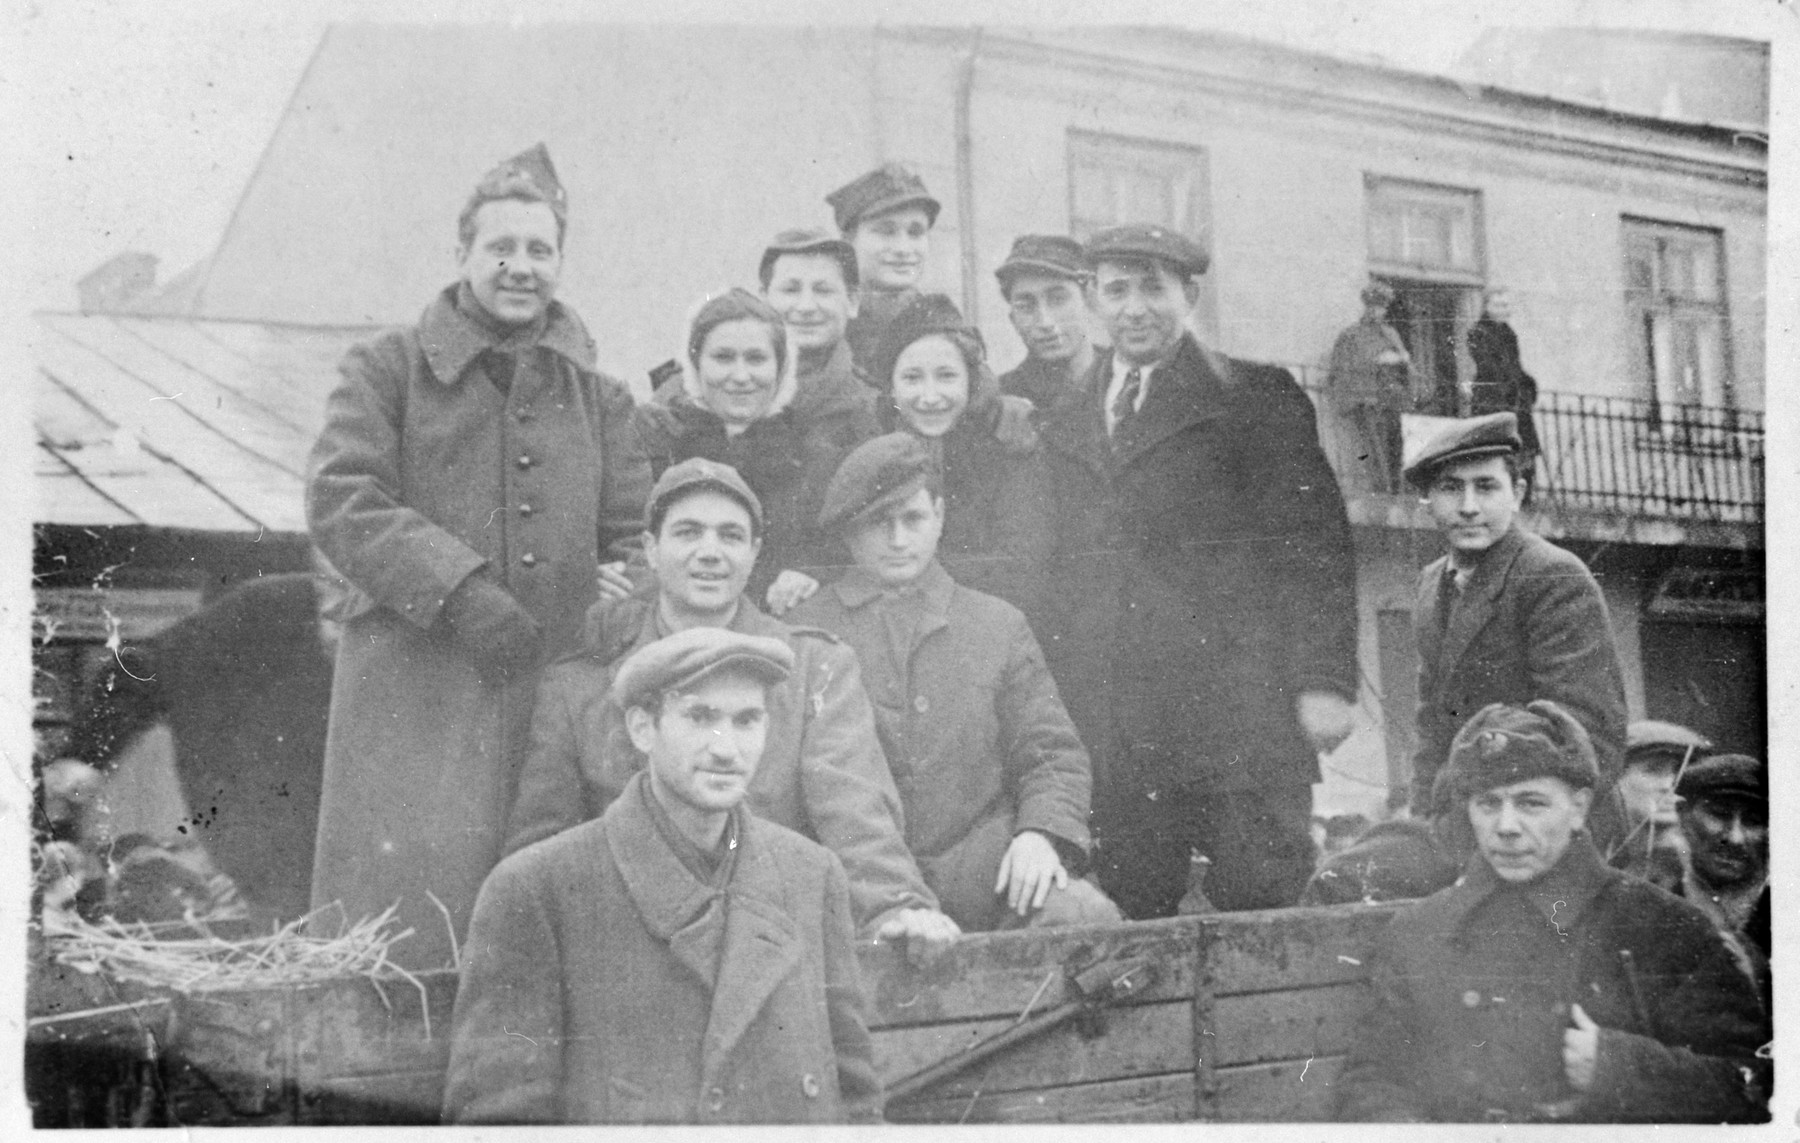 A group of newly liberated Jews pose with Soviet and American soldiers who were passing through the town of Losice.

The American soldiers had been taken captive after the Battle of the Bulge and were liberated by the Soviet army.  They were on their way back to the United States via Moscow.  After discovering that the soldiers were also Jewish, the Jews of Losice communicated with them in Yiddish.  

Among those pictured are Salus Mordkowicz, Asher Weinstein, Boris Mordkowicz, Belcia Pinkus, Ajzce Szerc, and Berl Losice.